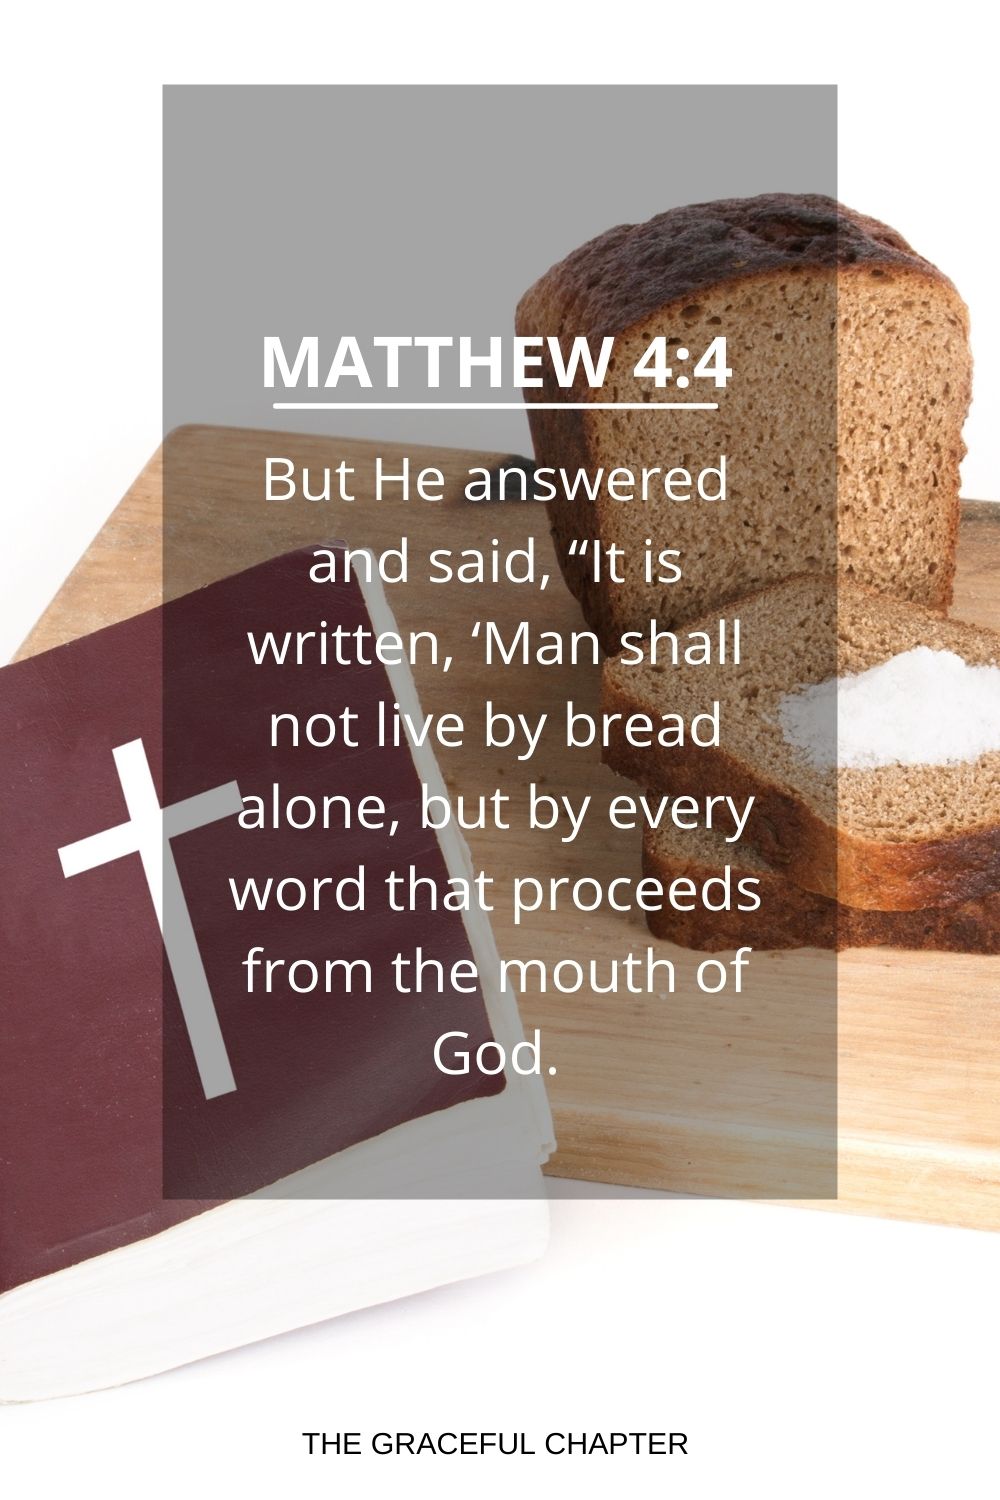 But He answered and said, “It is written, ‘Man shall not live by bread alone, but by every word that proceeds from the mouth of God. Matthew 4:4